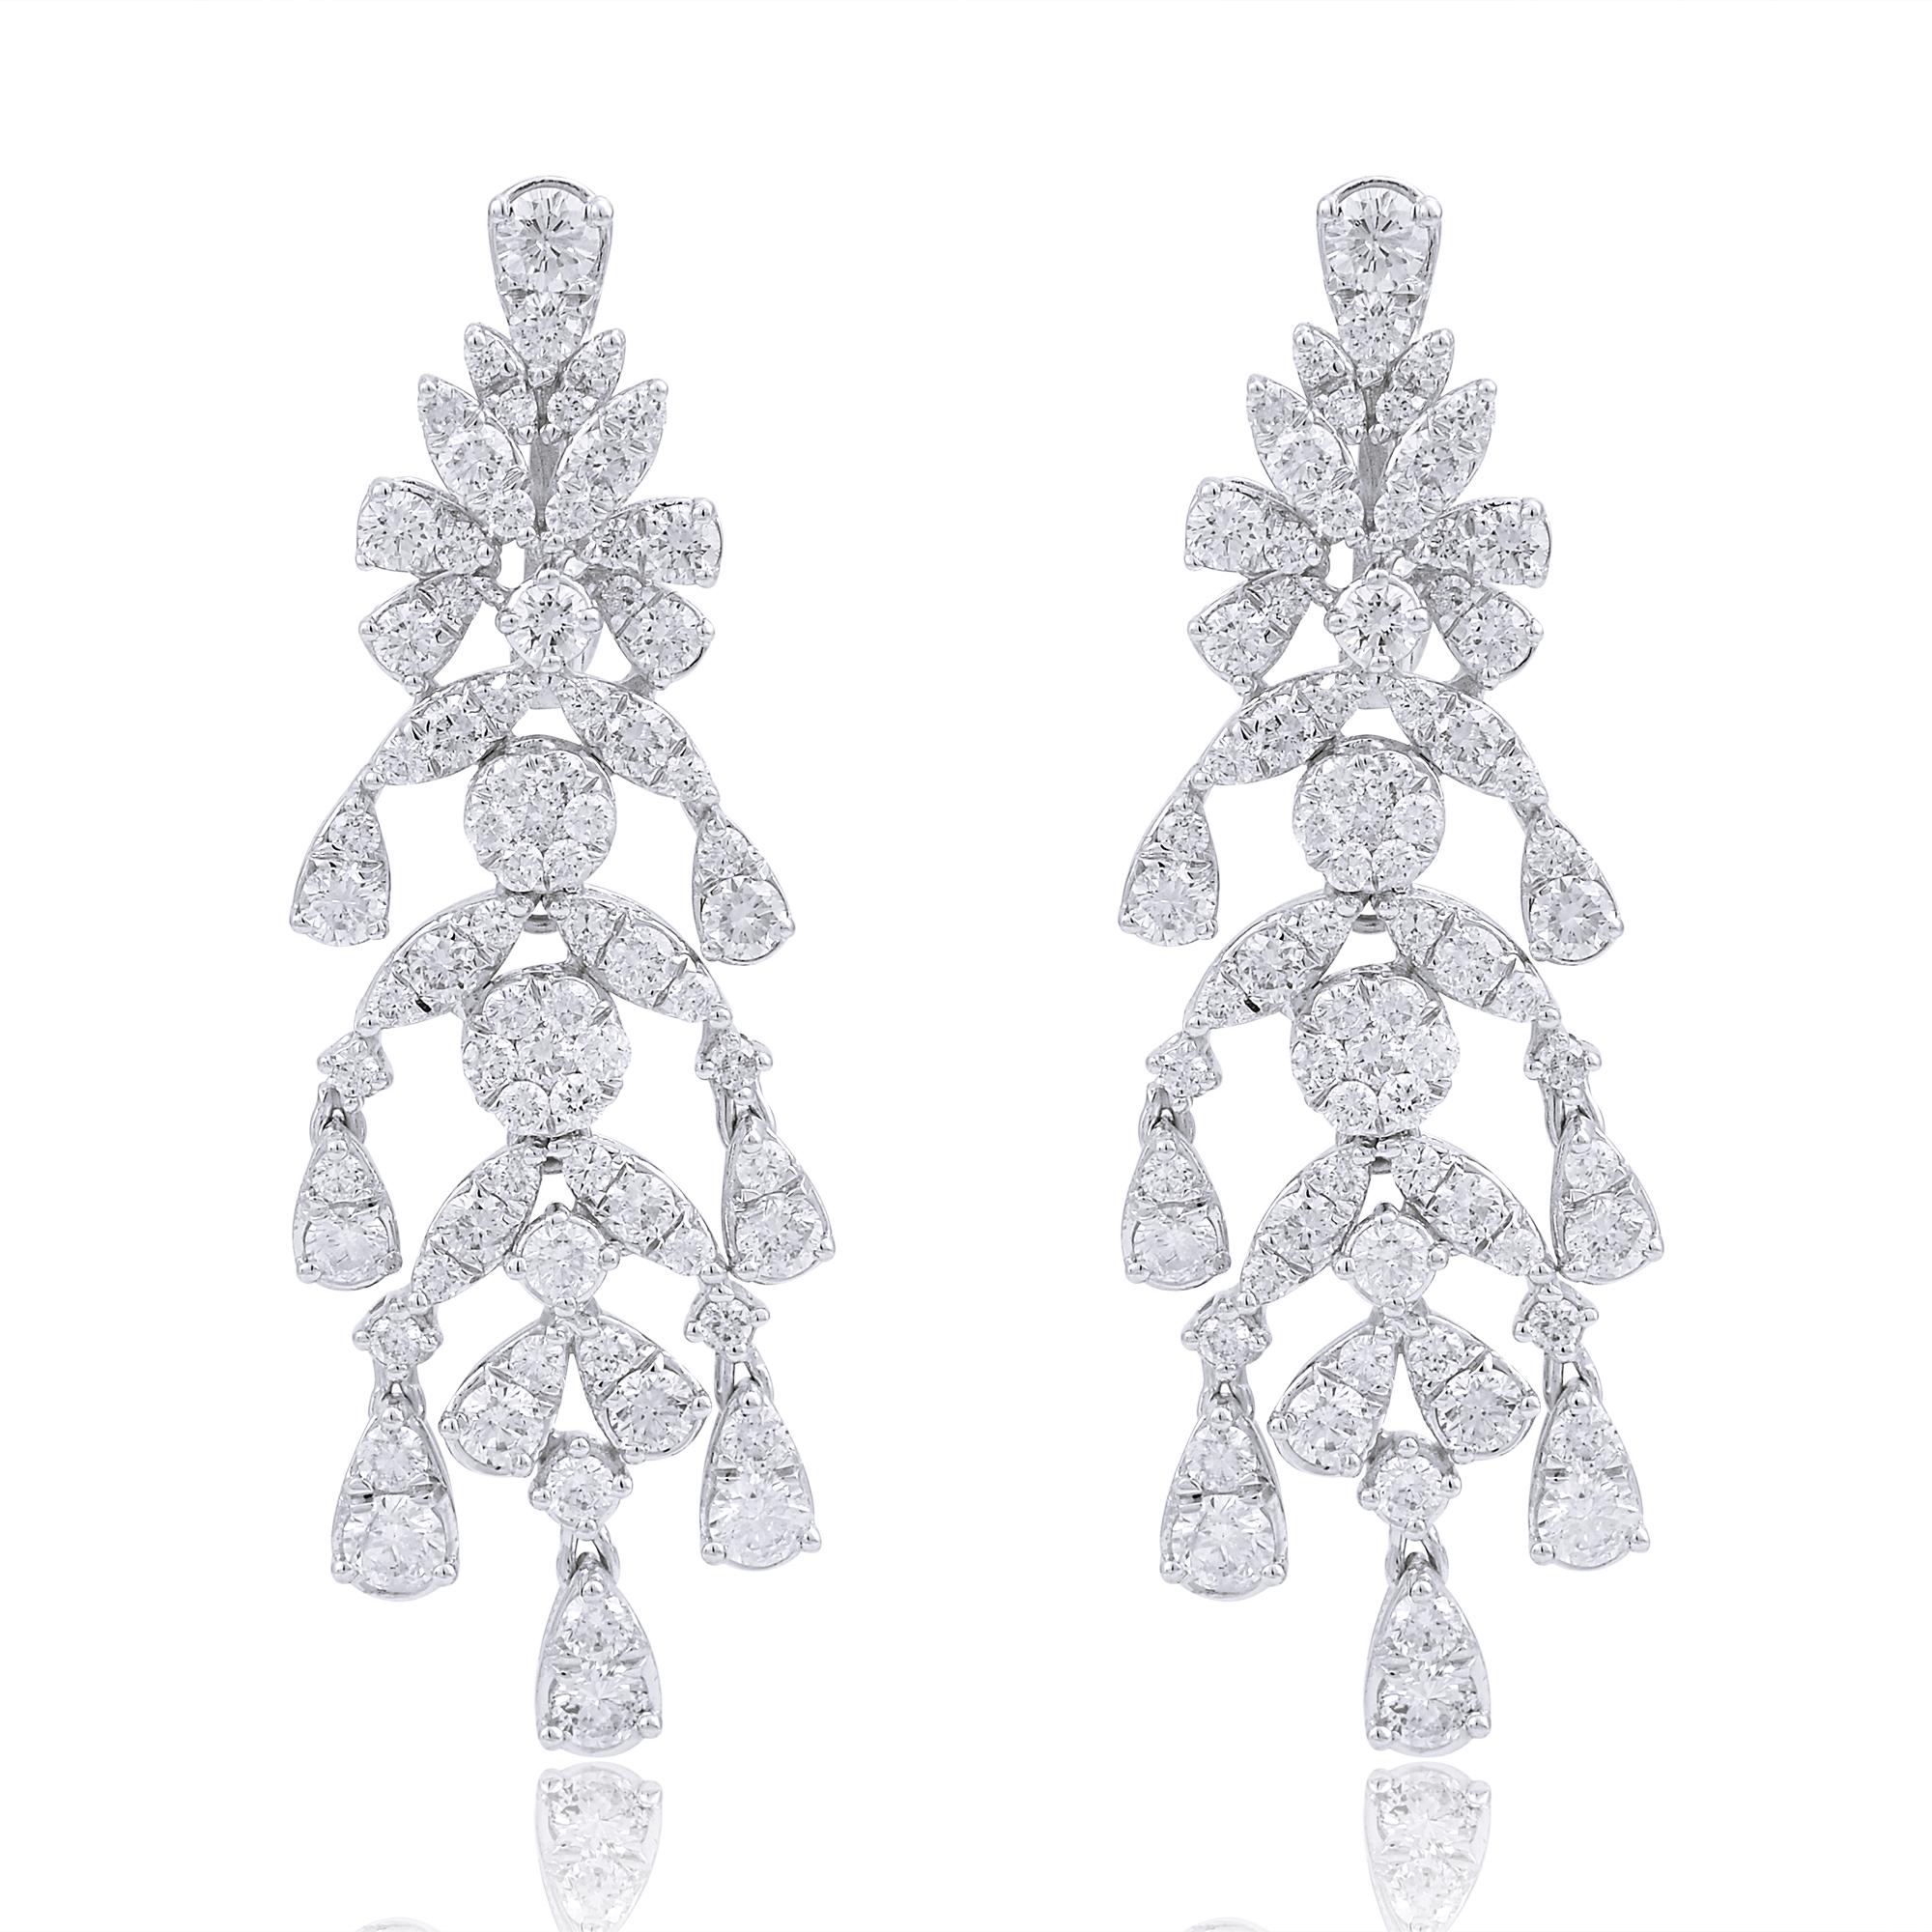 Item Code :- CN-41124A
Gross Wt. :- 11.52 gm
18k Solid White Gold Wt. :- 10.42 gm
Natural Diamond Wt. :- 5.50 Ct.  ( AVERAGE DIAMOND CLARITY SI1-SI2 & COLOR H-I )
Earrings Size :- 15.56 x 48.81 mm approx.

✦ Sizing
.....................
We can